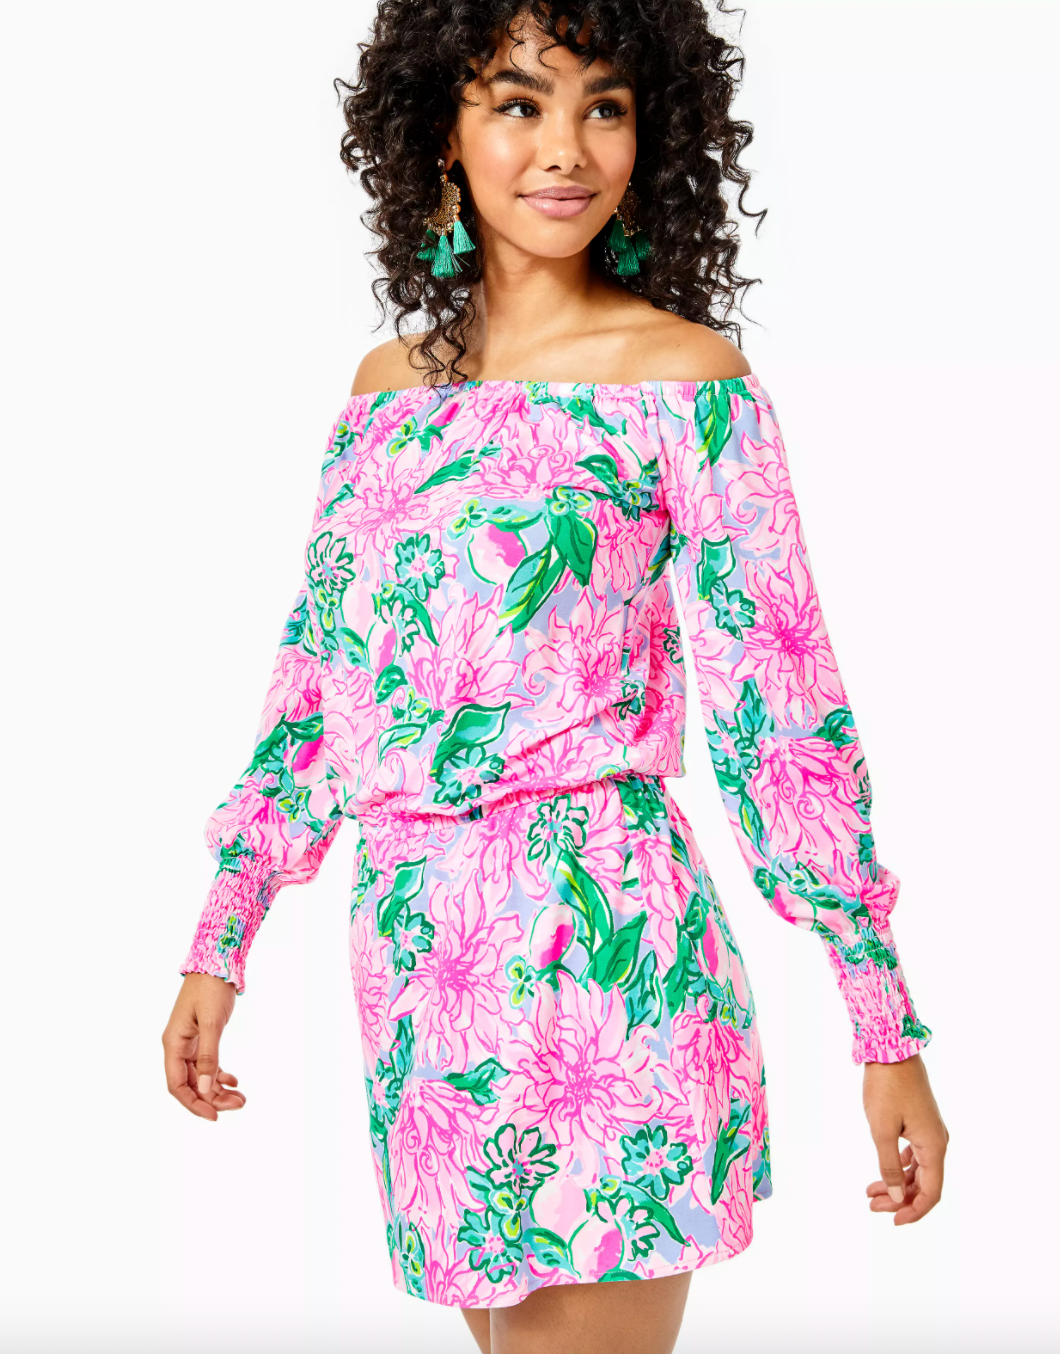 Lilly Pulitzer Sale Up to 70 off Dresses, Skirts, Masks and More